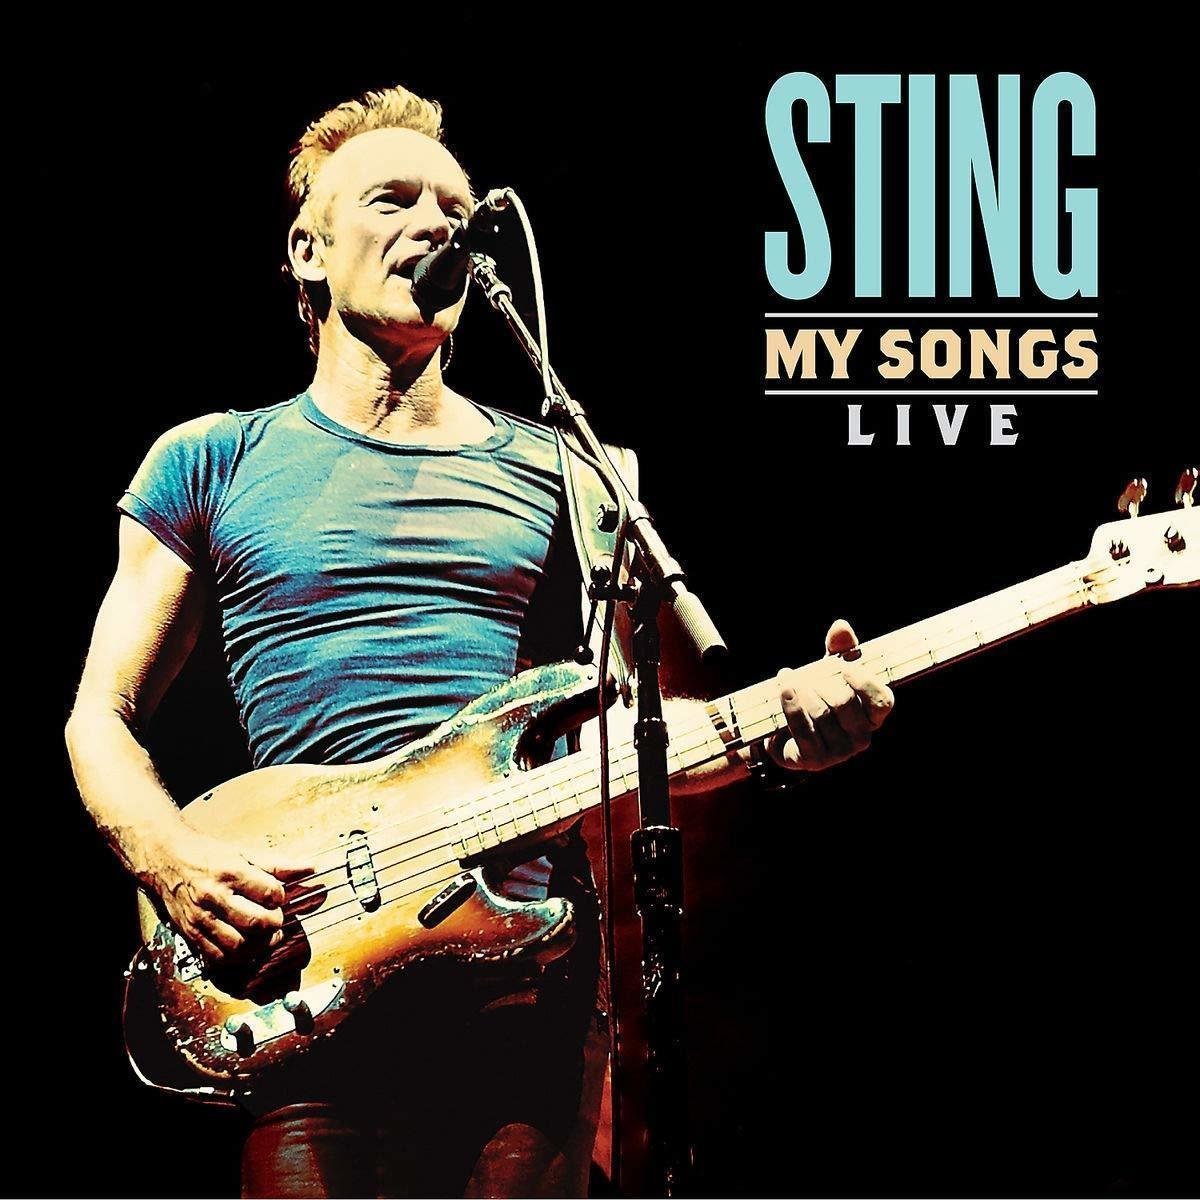 Sting - My Songs Live (2 LP)